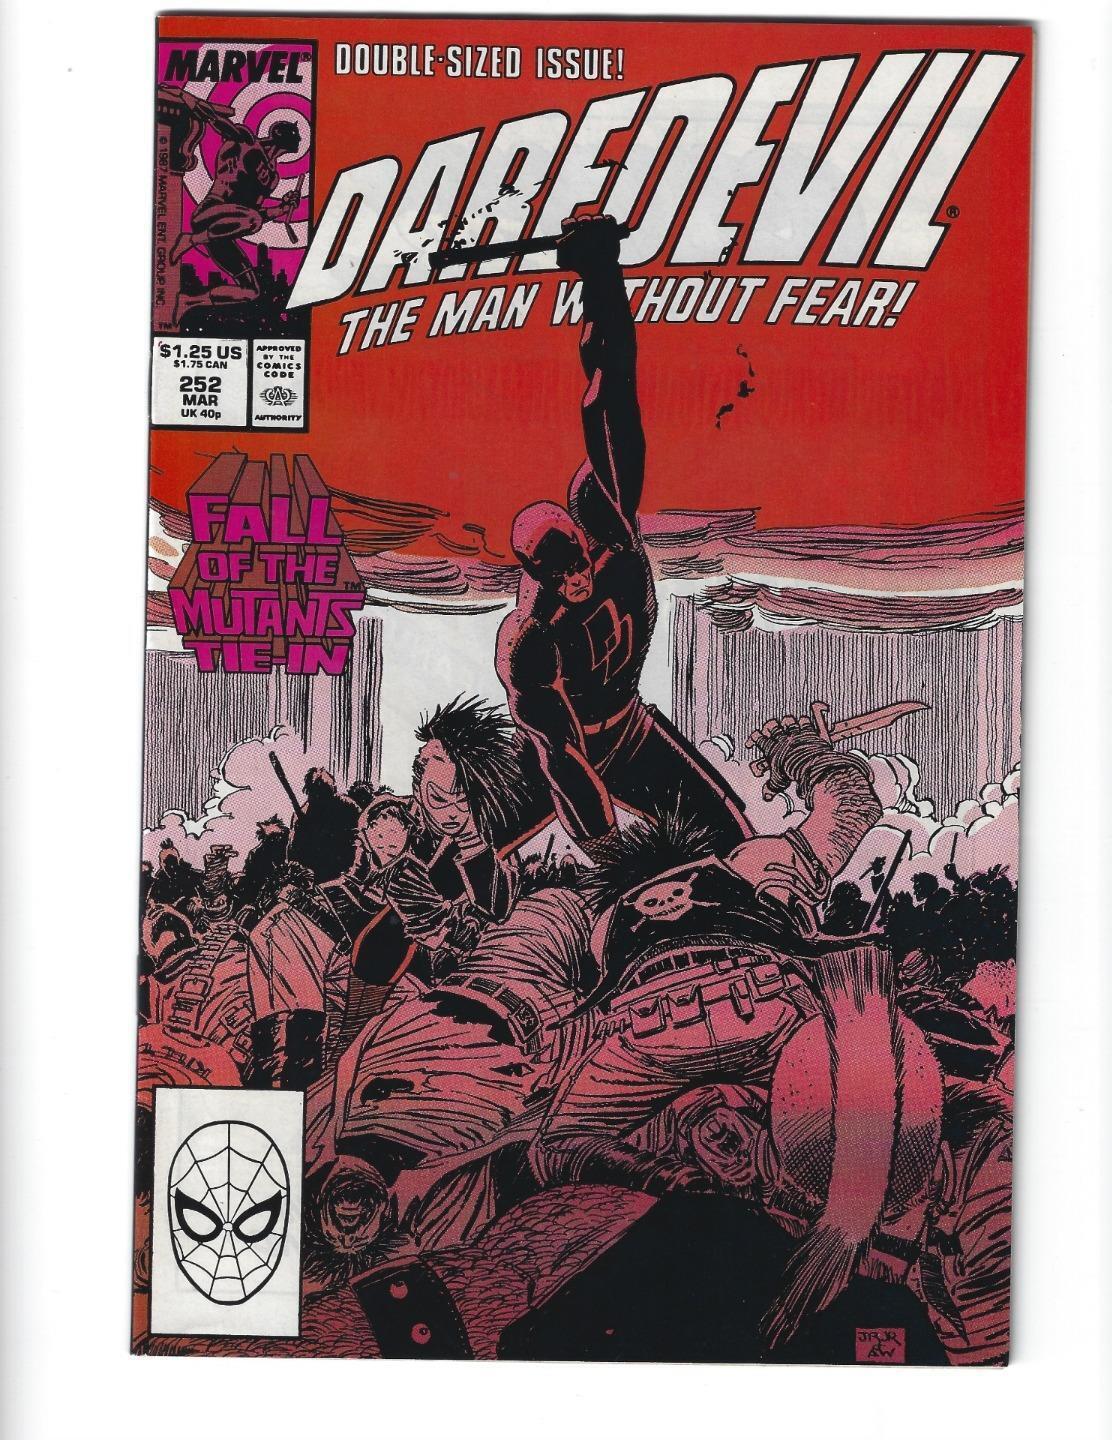 Daredevil #252, Double Sized, Mutant Massacre, VF 8.0, 1st Print, 1988,See Scans